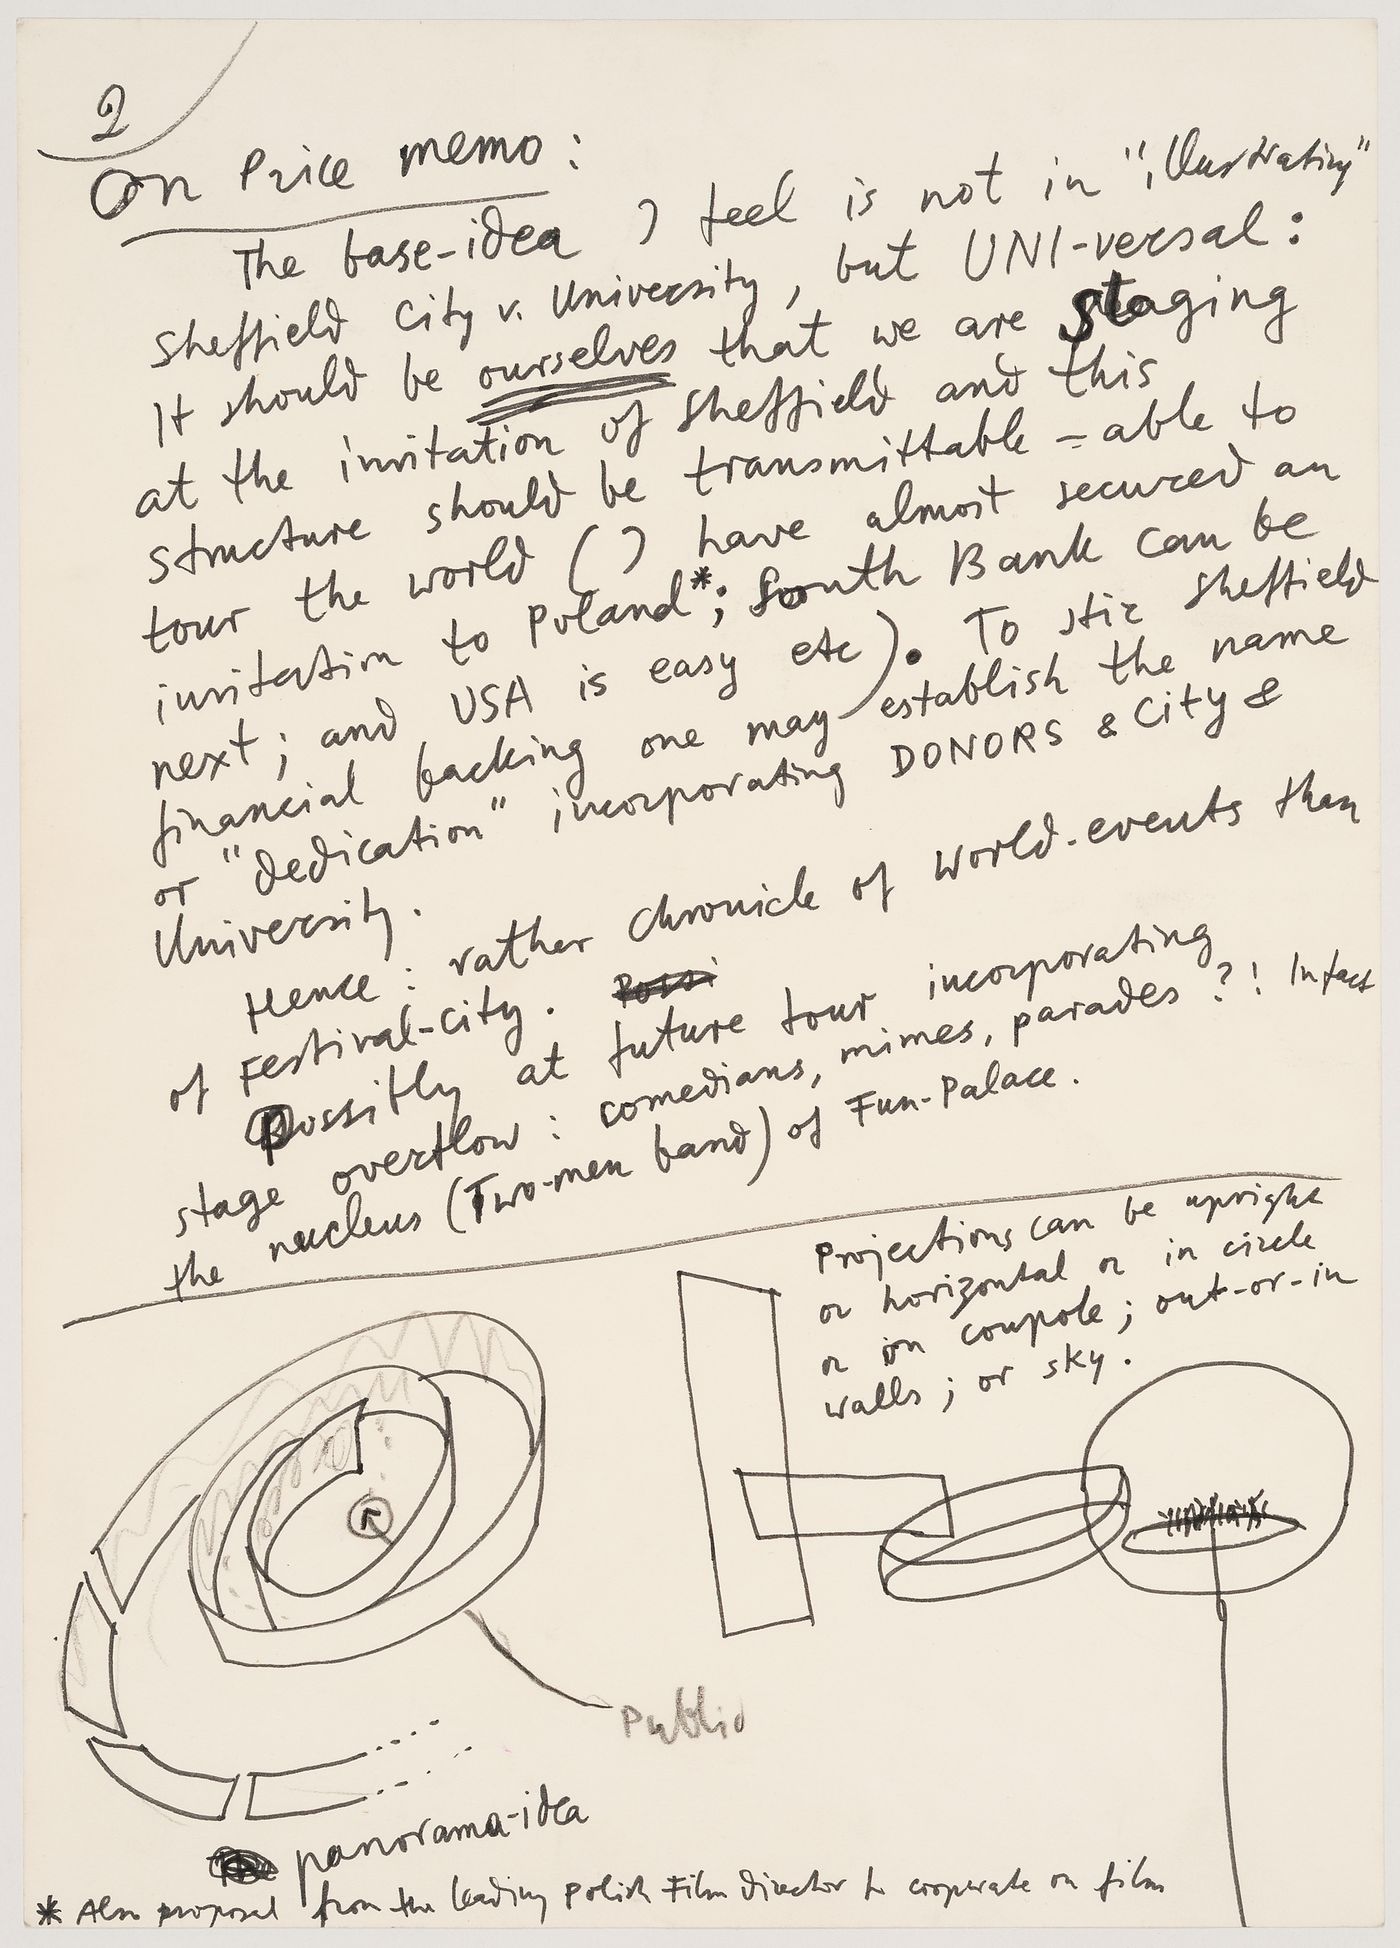 Notes and sketches for an exhibition at the Sheffield University Festival in 1966